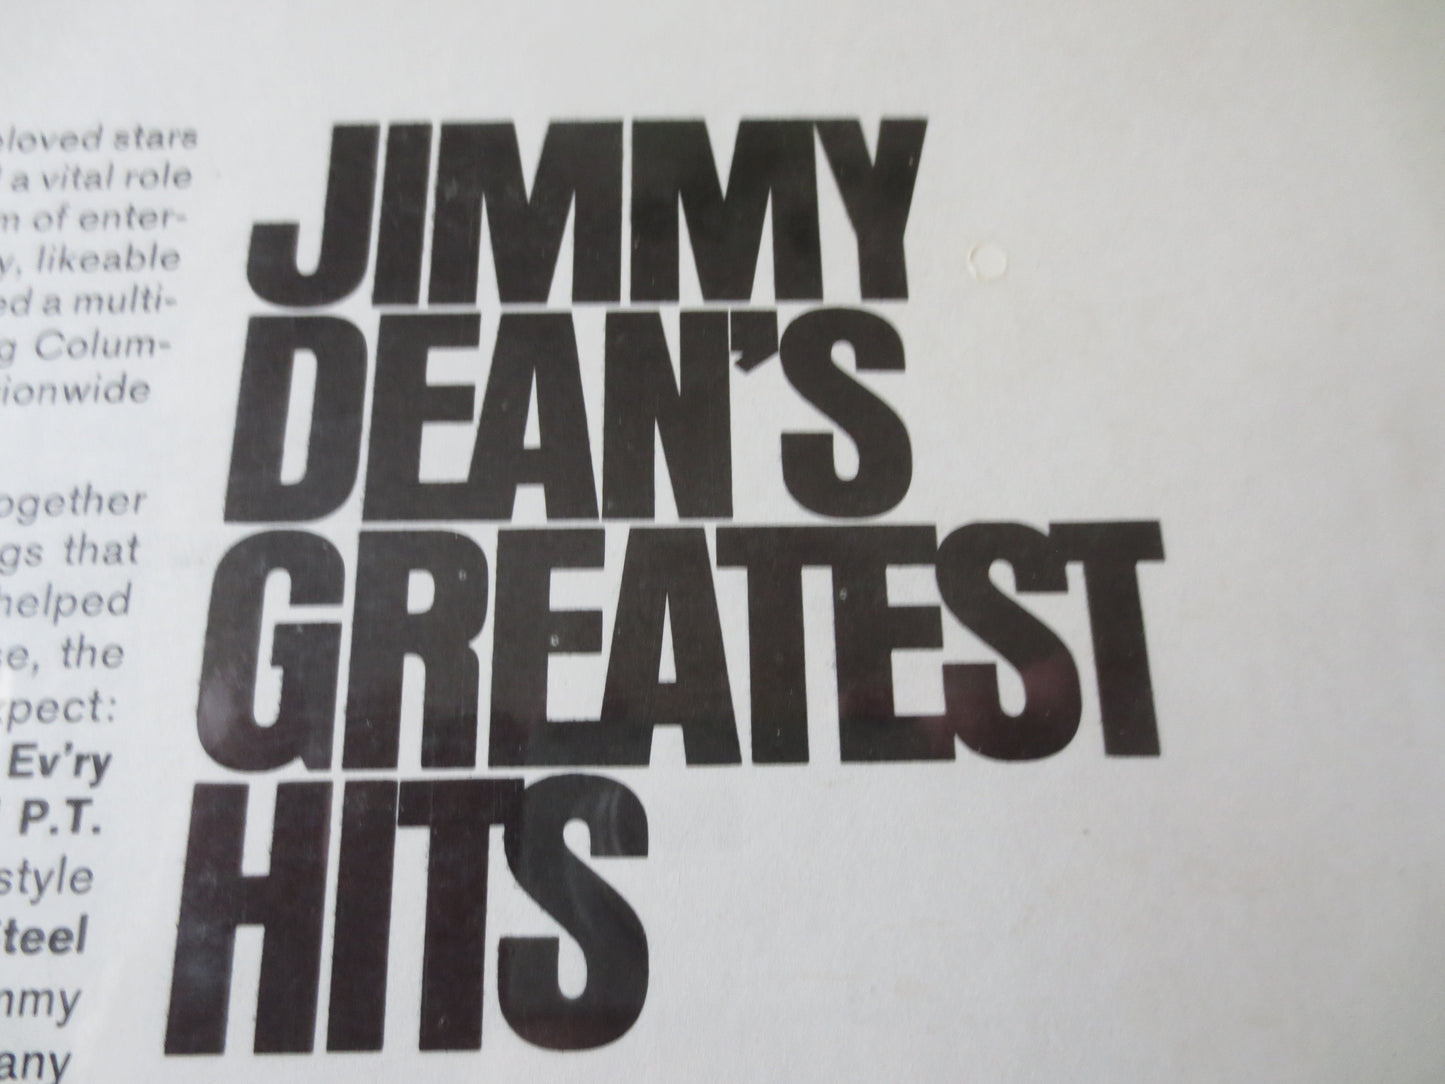 JIMMY DEAN Record, GREATEST Hits, Jimmy Dean Vinyl, Jimmy Dean Album, Vinyl Record, Jimmy Dean Lp, Vinyl lps, 1966 Records